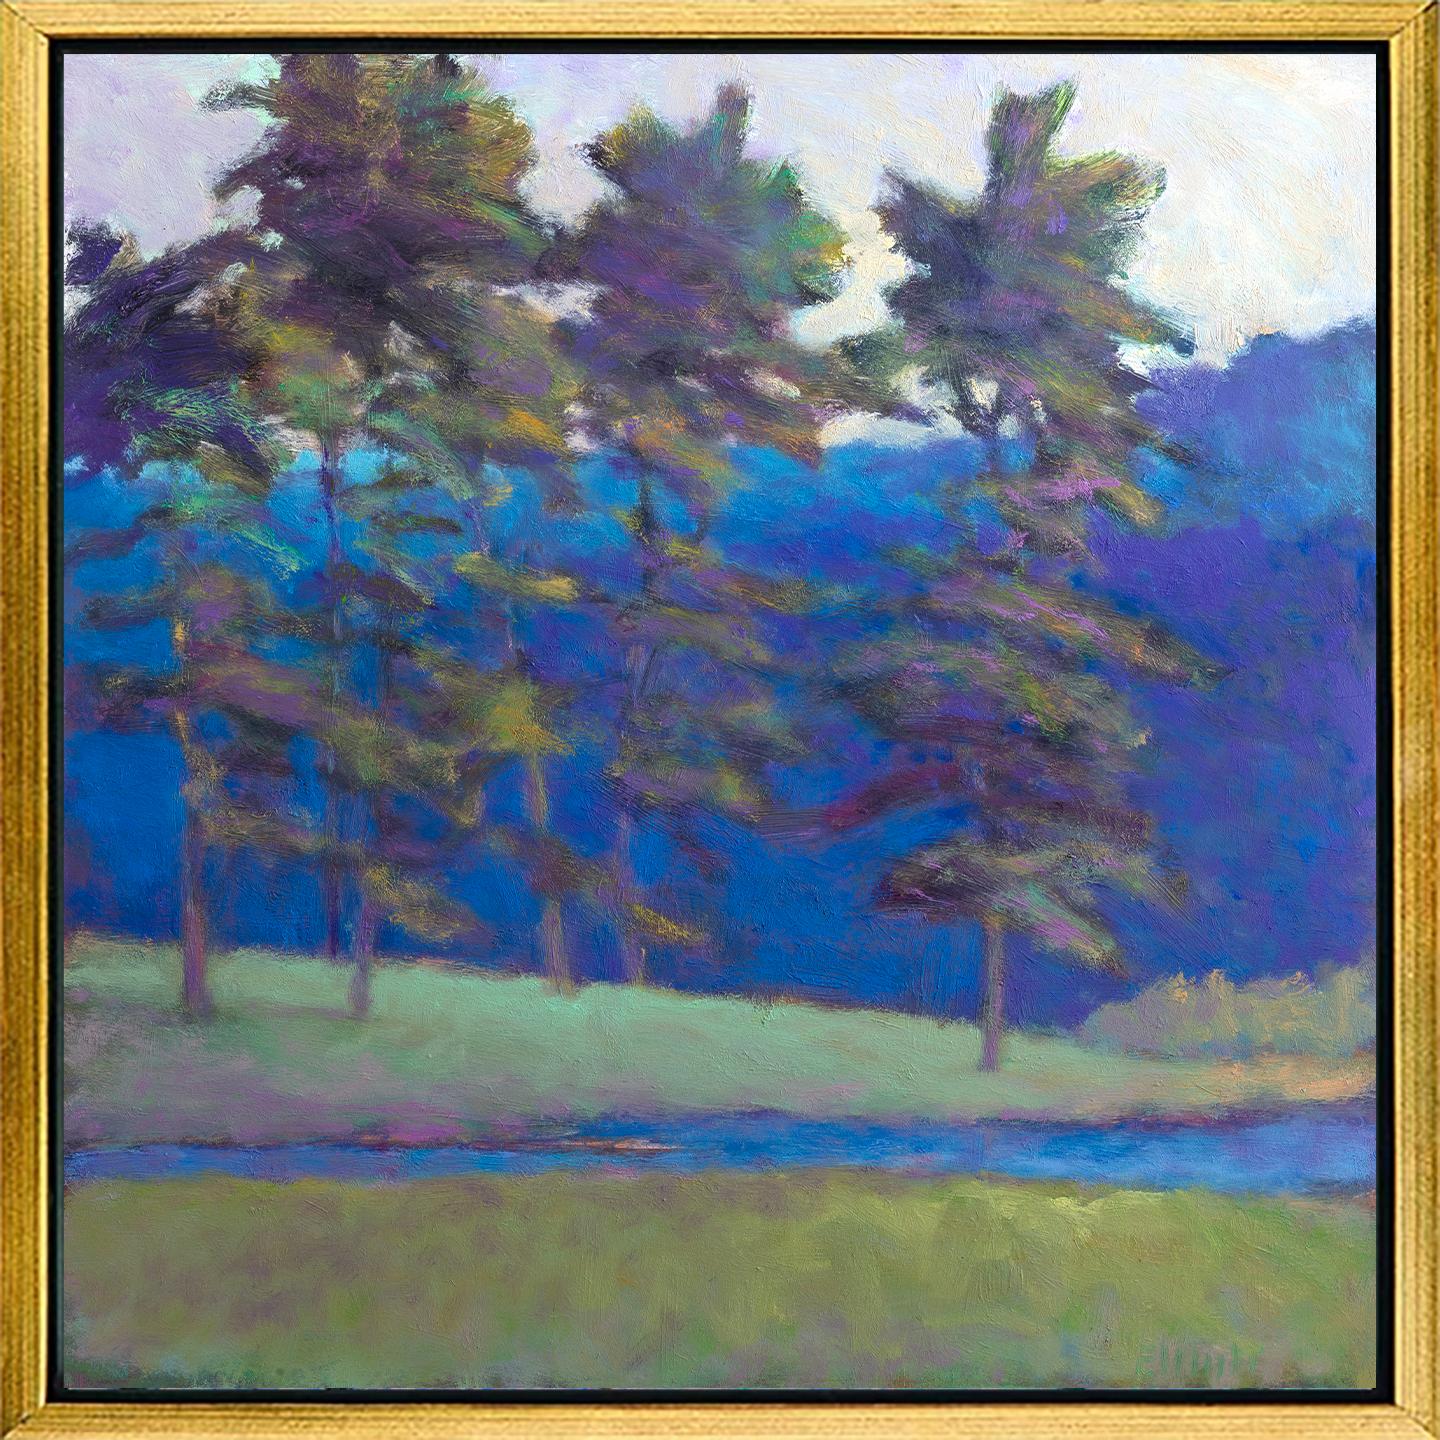 Ken Elliott Abstract Print - "At the Creek's Edge, " Framed Limited Edition Giclee Print, 48" x 48"